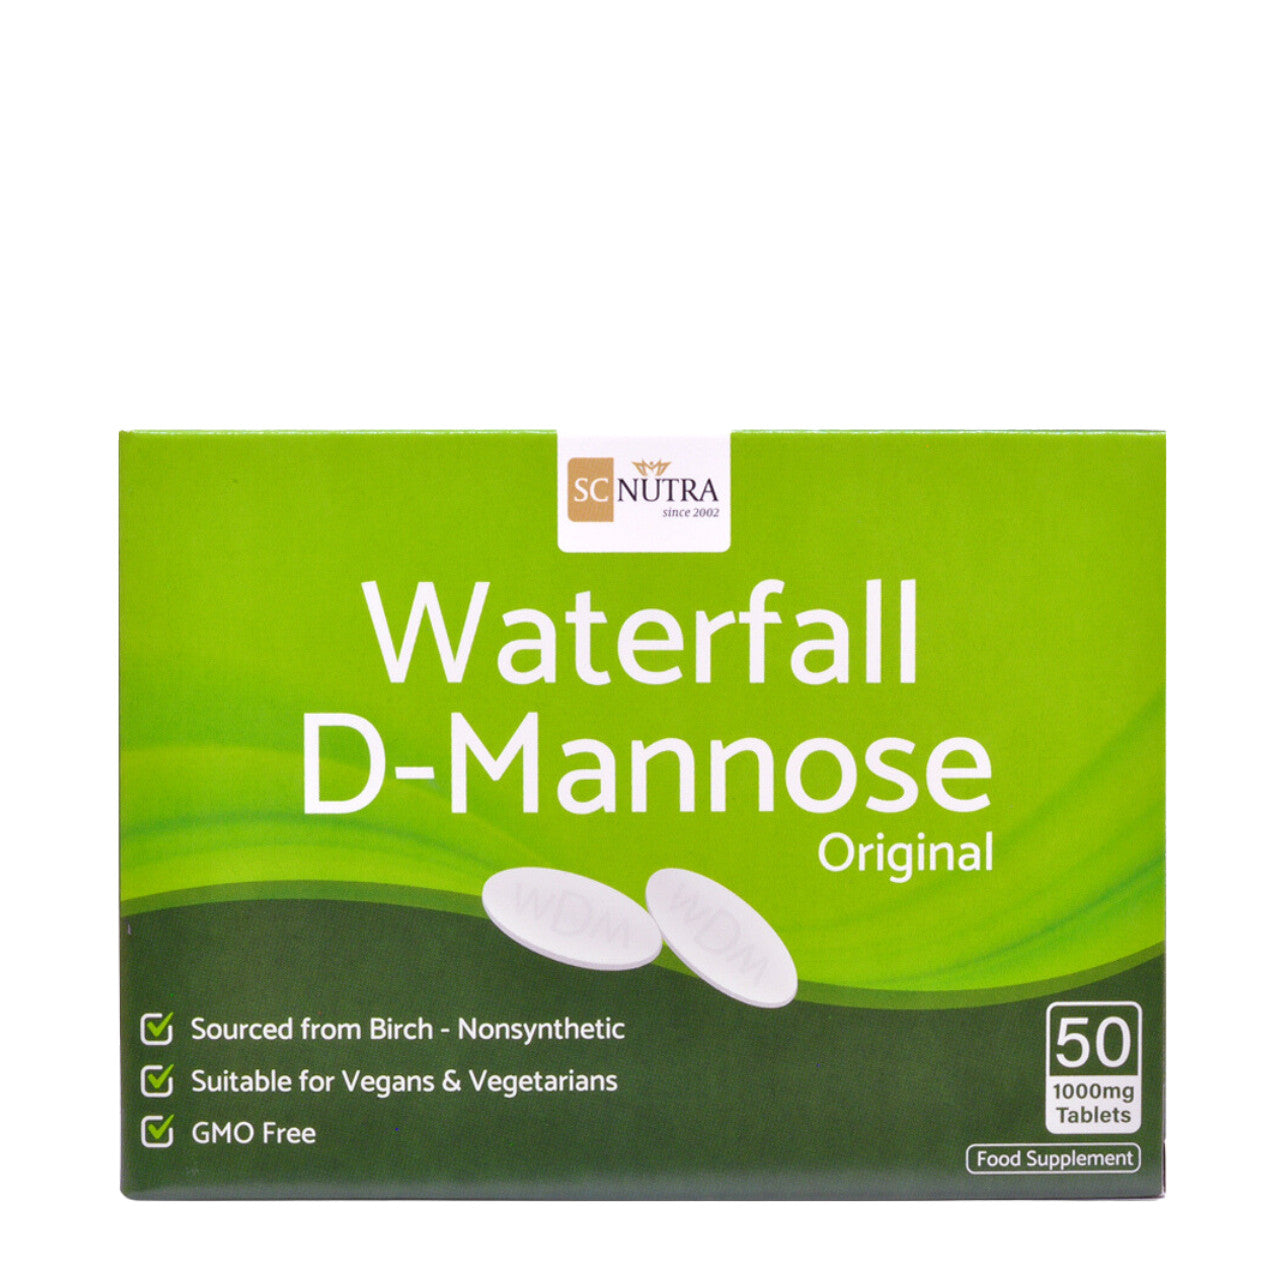 Sc Nutra Waterfall D-mannose 1000mg Tablets - 50s